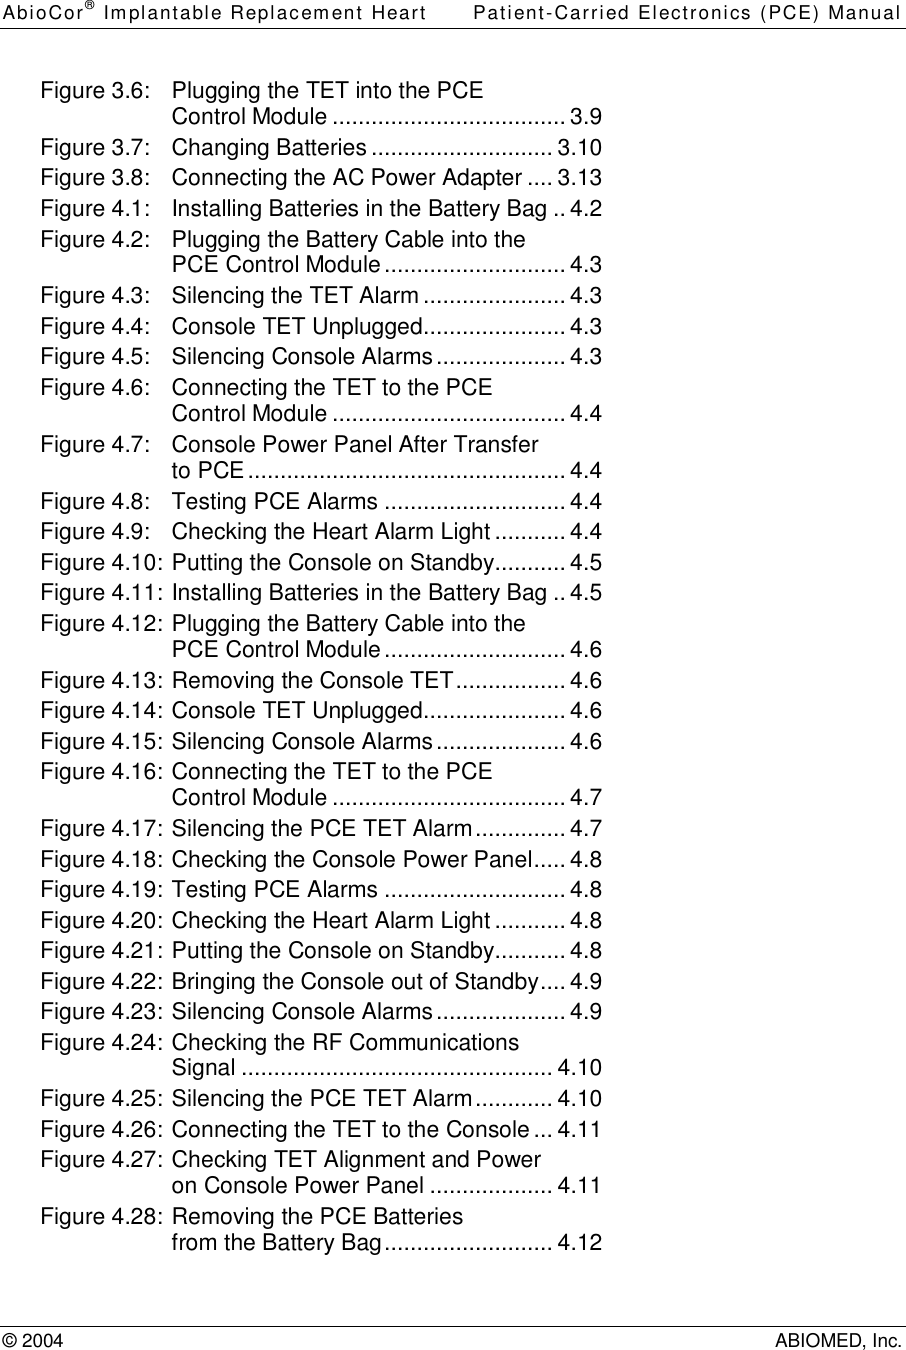 AbioCor® Implantable Replacement Heart Patient-Carried Electronics (PCE) Manual© 2004 ABIOMED, Inc.Figure 3.6: Plugging the TET into the PCEControl Module....................................3.9Figure 3.7: Changing Batteries............................3.10Figure 3.8: Connecting the AC Power Adapter....3.13Figure 4.1: Installing Batteries in the Battery Bag..4.2Figure 4.2: Plugging the Battery Cable into thePCE Control Module............................4.3Figure 4.3: Silencing the TET Alarm......................4.3Figure 4.4: Console TET Unplugged......................4.3Figure 4.5: Silencing Console Alarms....................4.3Figure 4.6: Connecting the TET to the PCEControl Module....................................4.4Figure 4.7: Console Power Panel After Transferto PCE.................................................4.4Figure 4.8: Testing PCE Alarms............................4.4Figure 4.9: Checking the Heart Alarm Light...........4.4Figure 4.10:Putting the Console on Standby...........4.5Figure 4.11:Installing Batteries in the Battery Bag..4.5Figure 4.12:Plugging the Battery Cable into thePCE Control Module............................4.6Figure 4.13:Removing the Console TET.................4.6Figure 4.14:Console TET Unplugged......................4.6Figure 4.15:Silencing Console Alarms....................4.6Figure 4.16:Connecting the TET to the PCEControl Module....................................4.7Figure 4.17:Silencing the PCE TET Alarm..............4.7Figure 4.18:Checking the Console Power Panel.....4.8Figure 4.19:Testing PCE Alarms............................4.8Figure 4.20:Checking the Heart Alarm Light...........4.8Figure 4.21:Putting the Console on Standby...........4.8Figure 4.22:Bringing the Console out of Standby....4.9Figure 4.23:Silencing Console Alarms....................4.9Figure 4.24:Checking the RF CommunicationsSignal................................................4.10Figure 4.25:Silencing the PCE TET Alarm............4.10Figure 4.26:Connecting the TET to the Console...4.11Figure 4.27:Checking TET Alignment and Poweron Console Power Panel...................4.11Figure 4.28:Removing the PCE Batteriesfrom the Battery Bag..........................4.12